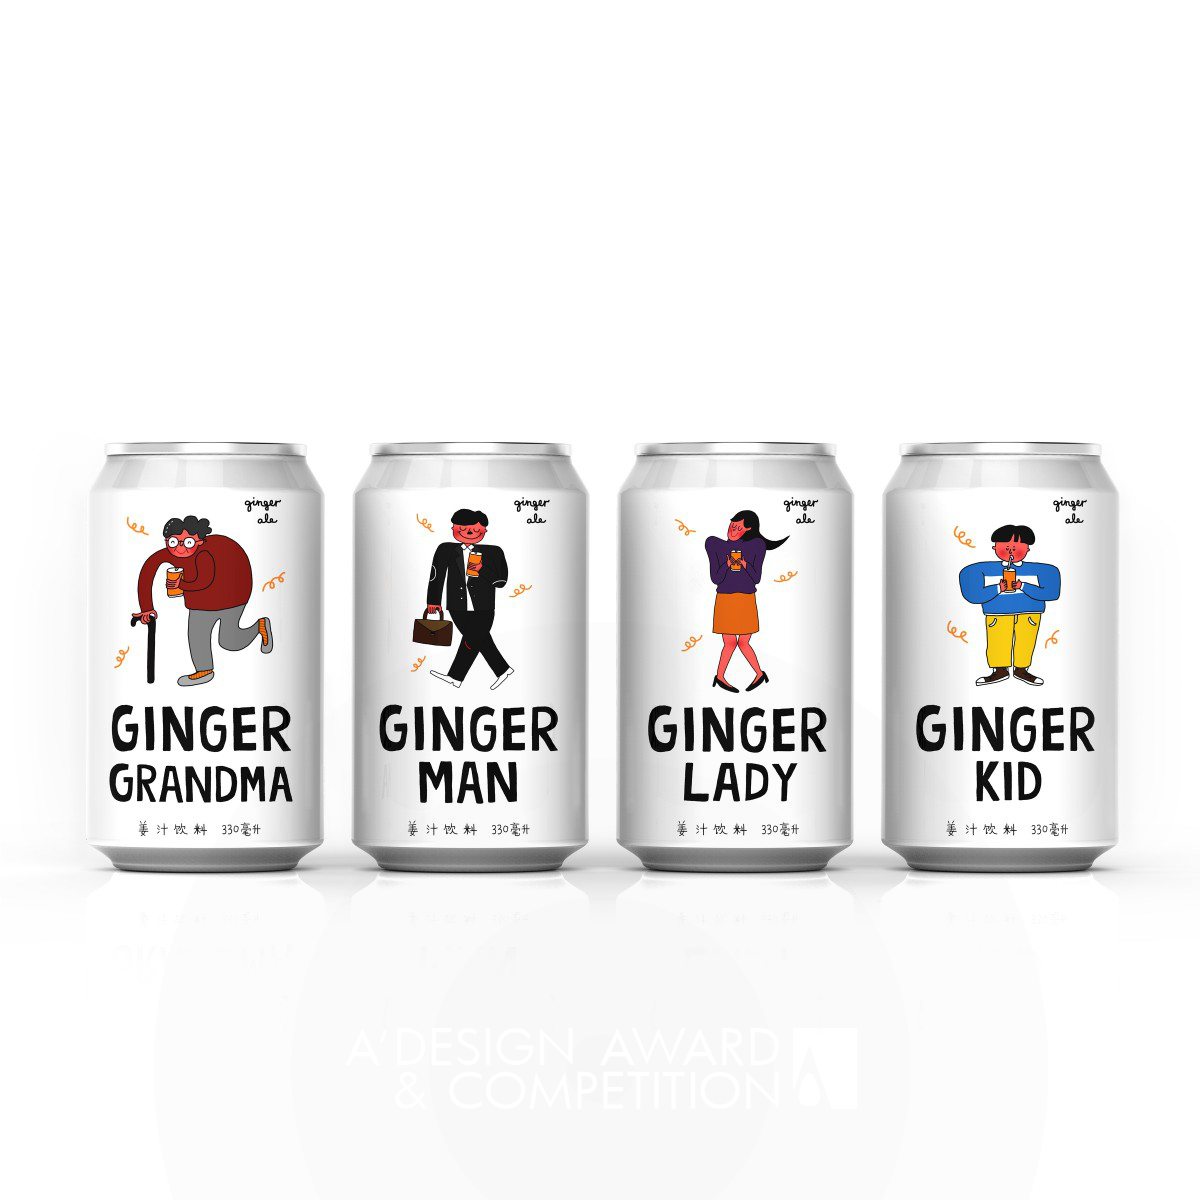 Wen Liu wins Silver at the prestigious A' Packaging Design Award with Happy Ginger Ale Beverage.